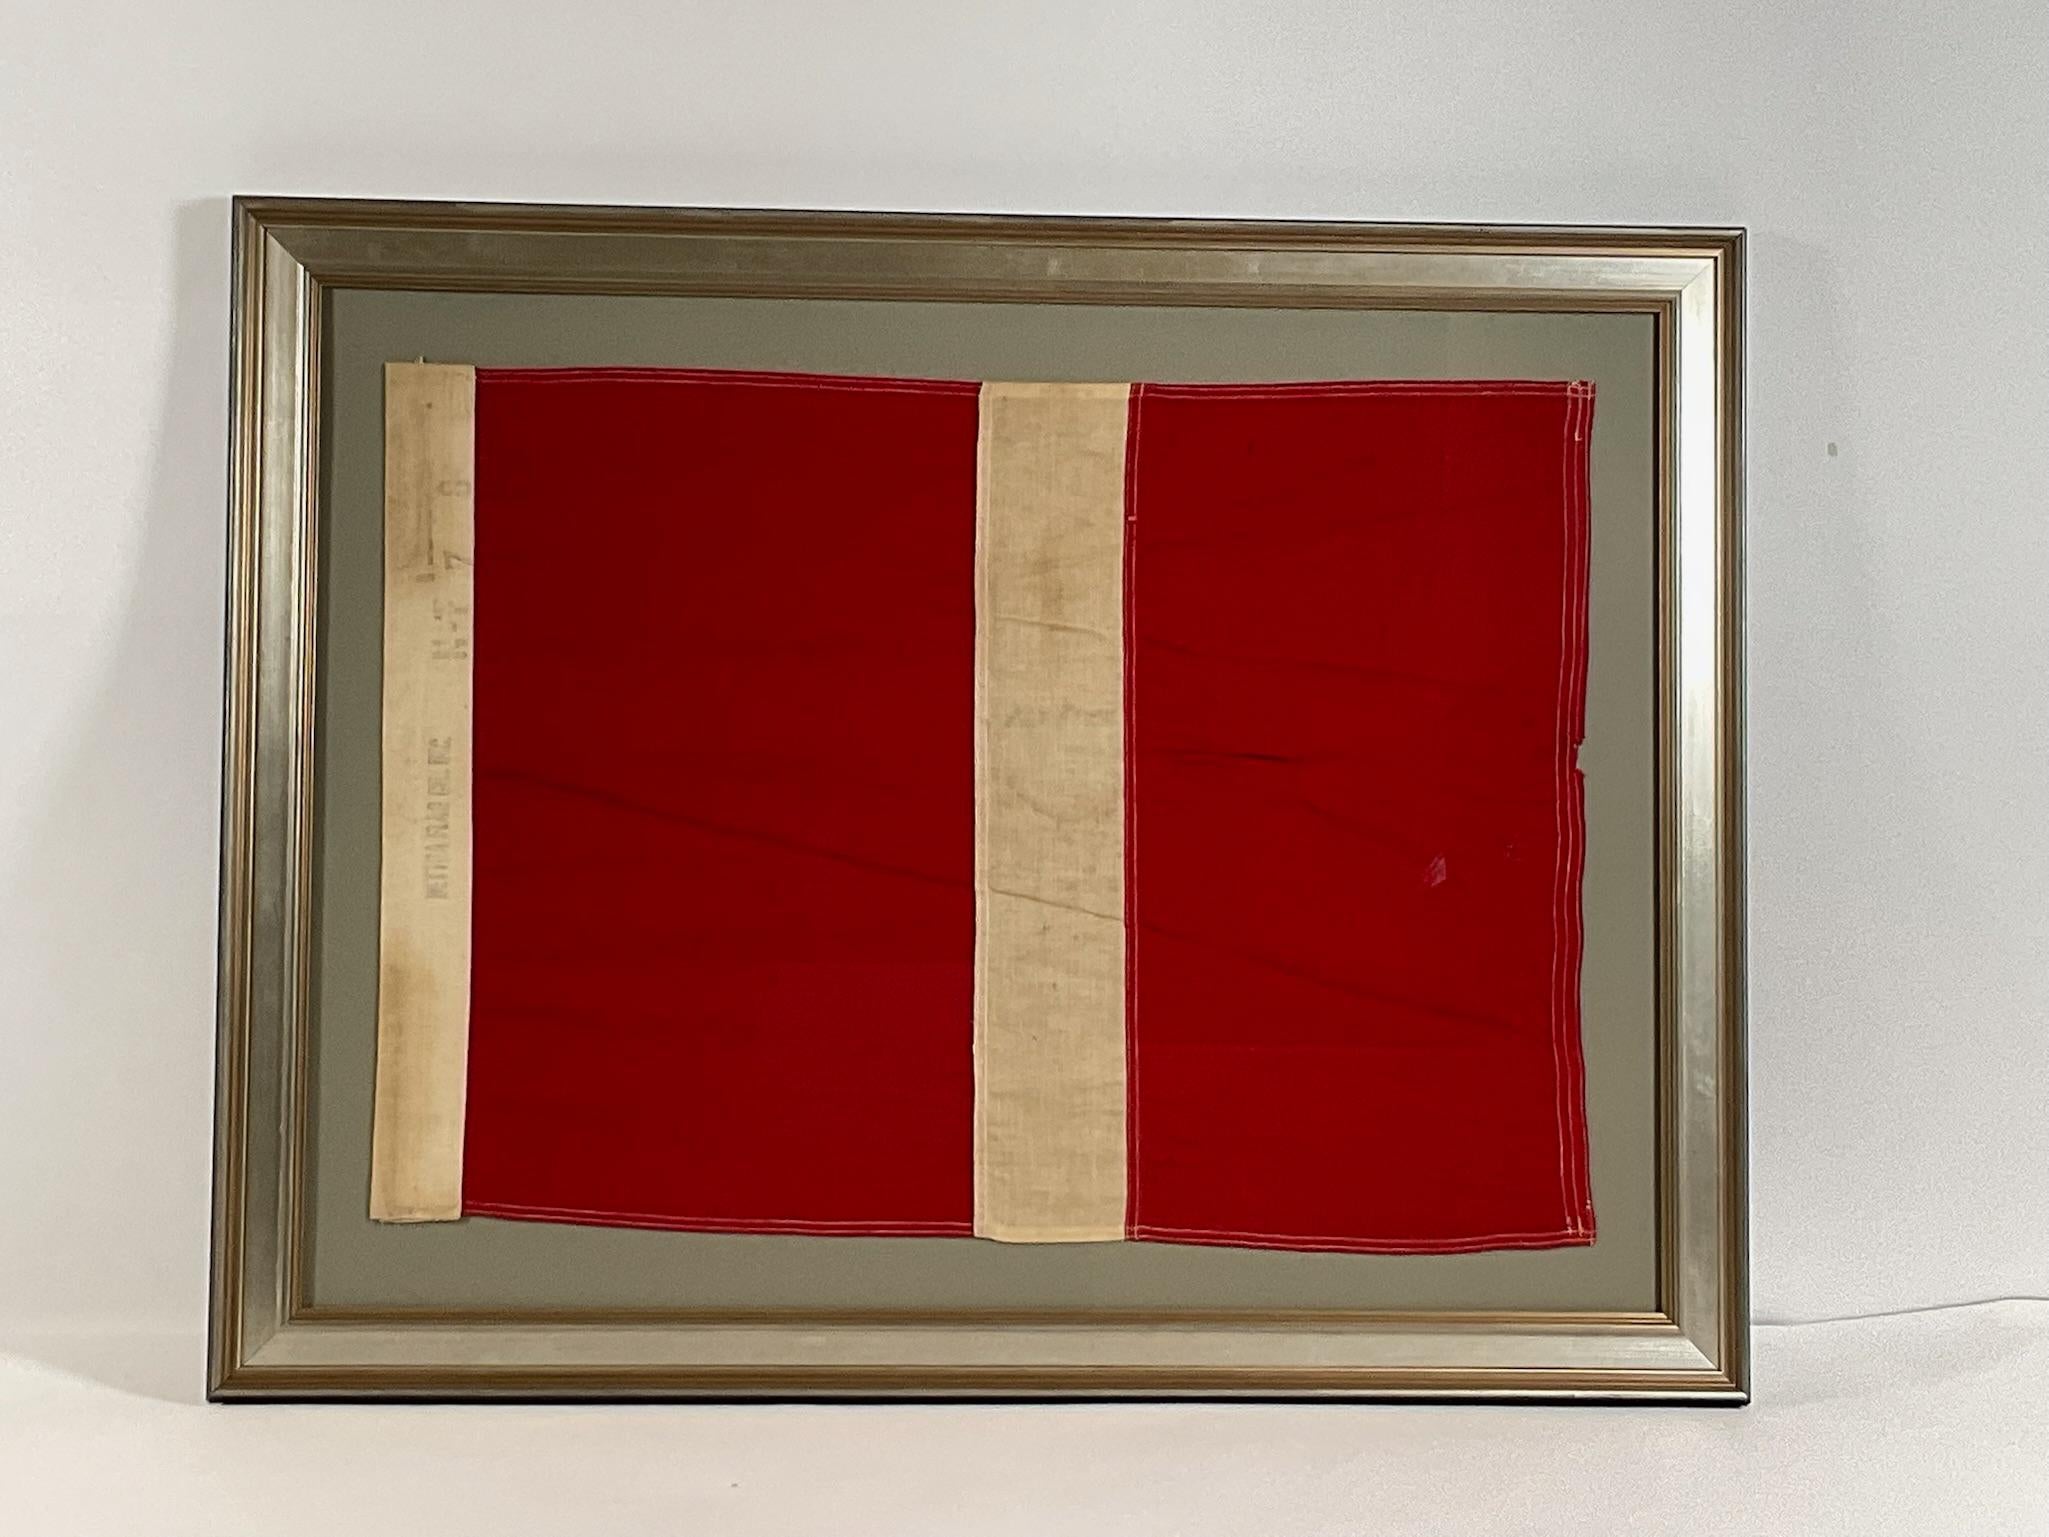 North American Framed Nautical Flag by Dettra For Sale